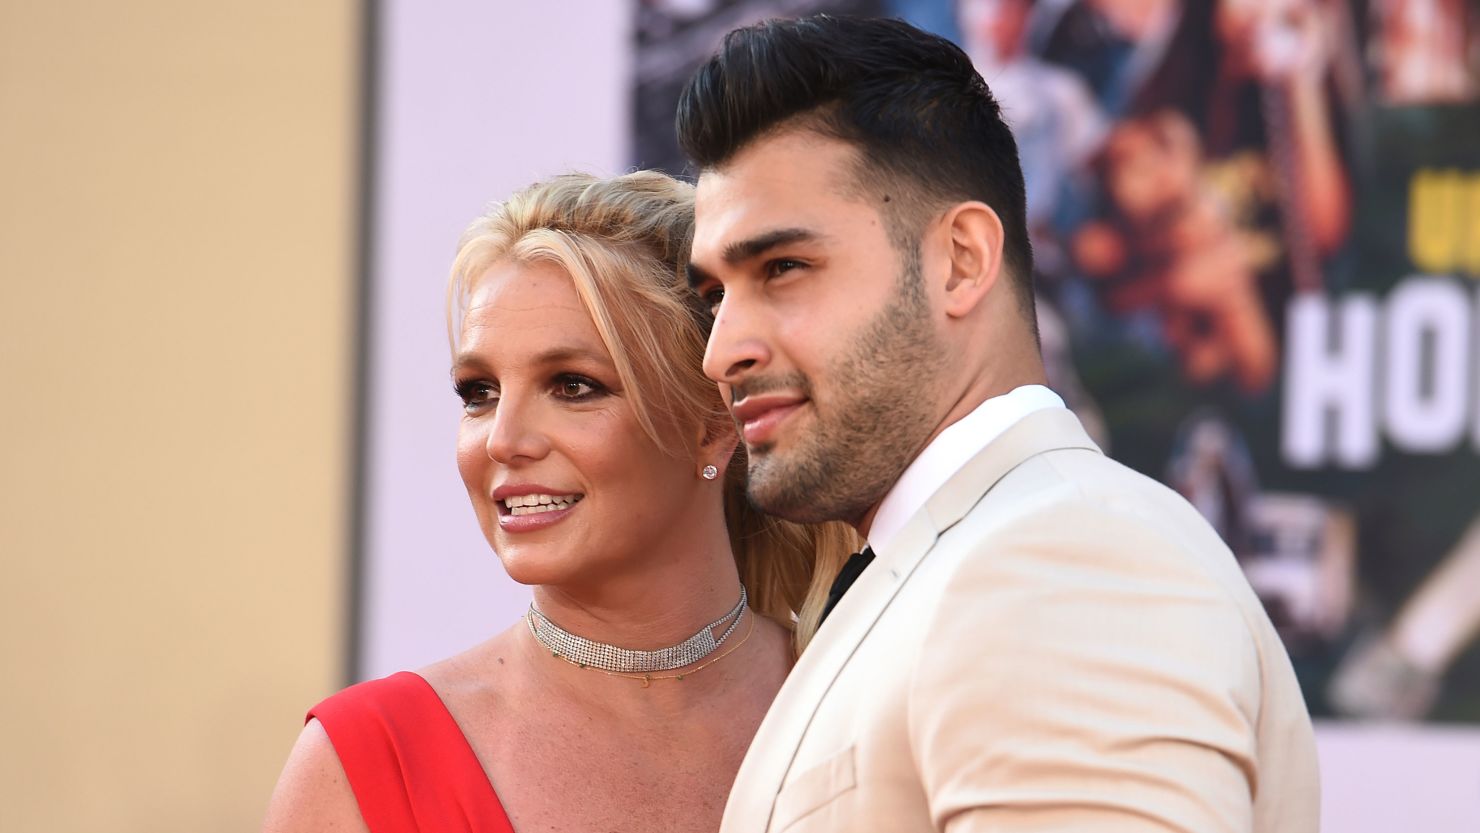 Britney Spears and Sam Asghari arrive at the Los Angeles premiere of "Once Upon a Time in Hollywood," at the TCL Chinese Theatre, Monday, July 22, 2019.